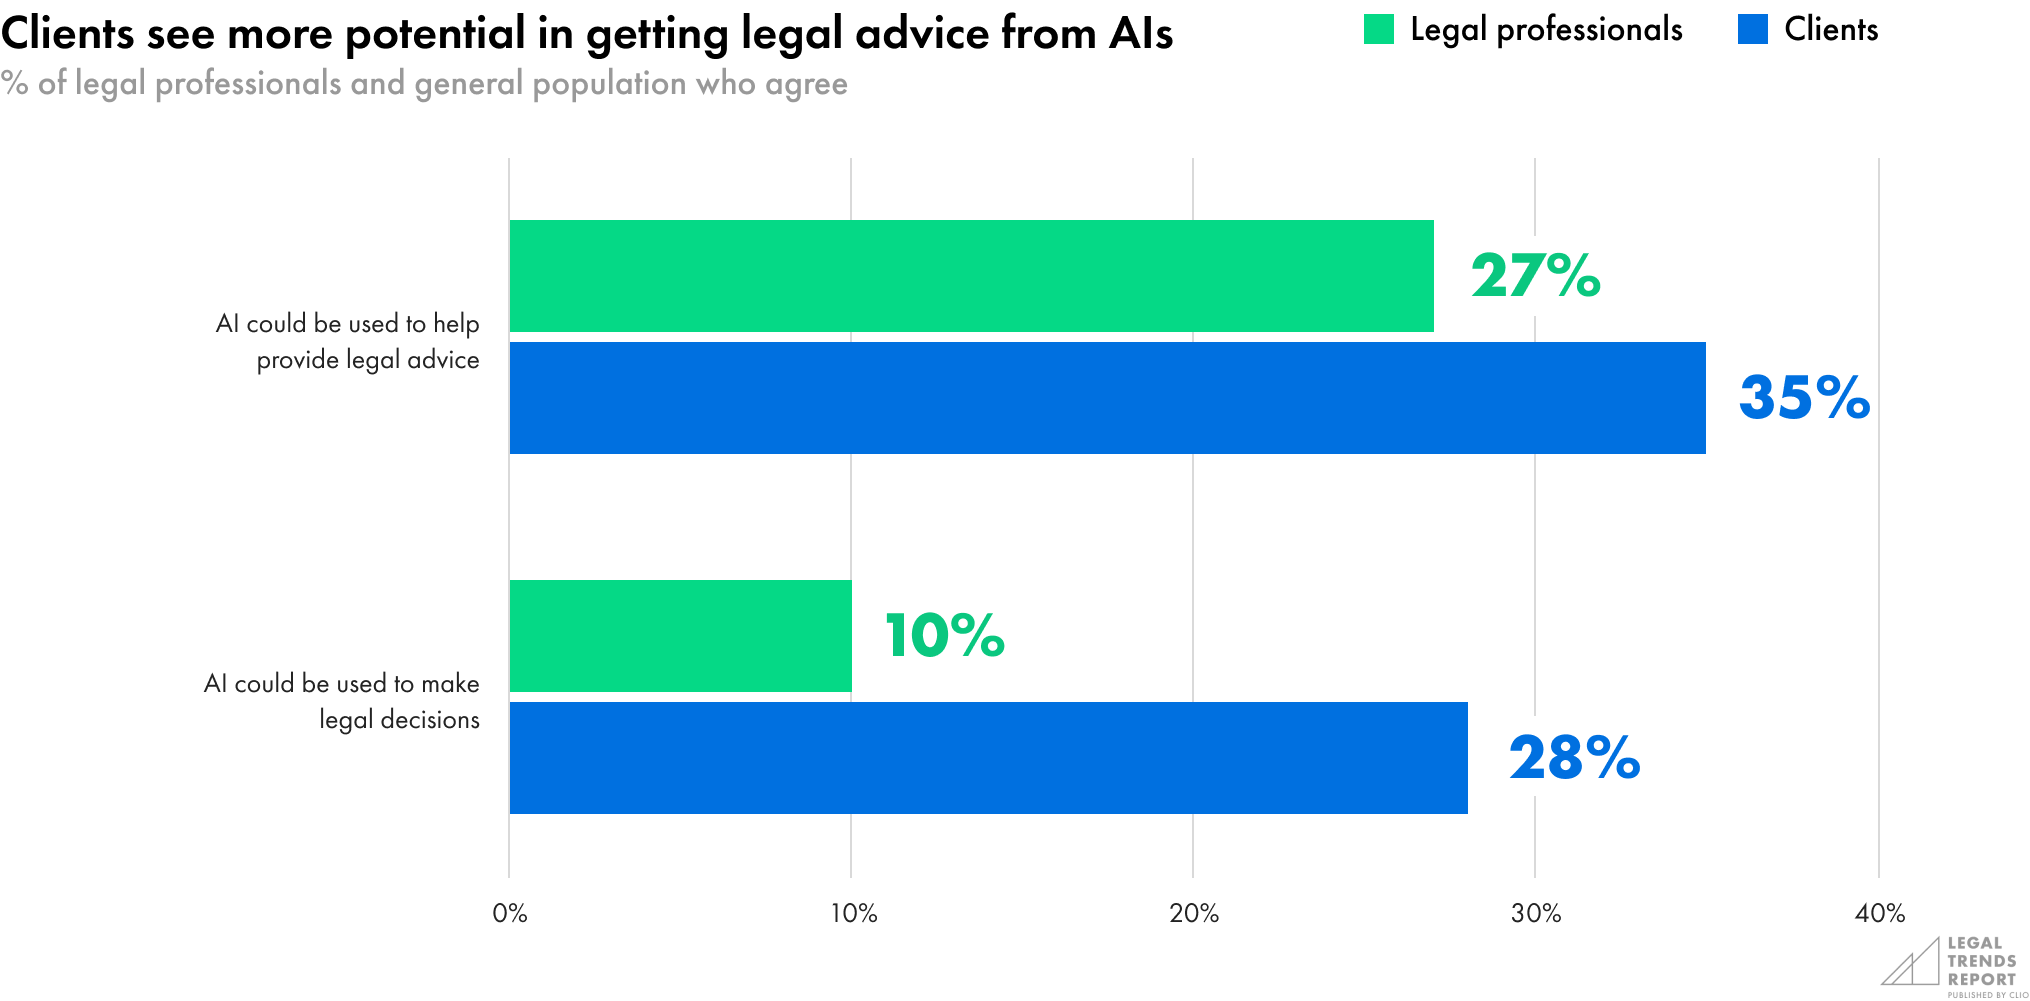 Clients see more potential in getting legal advice from AIs